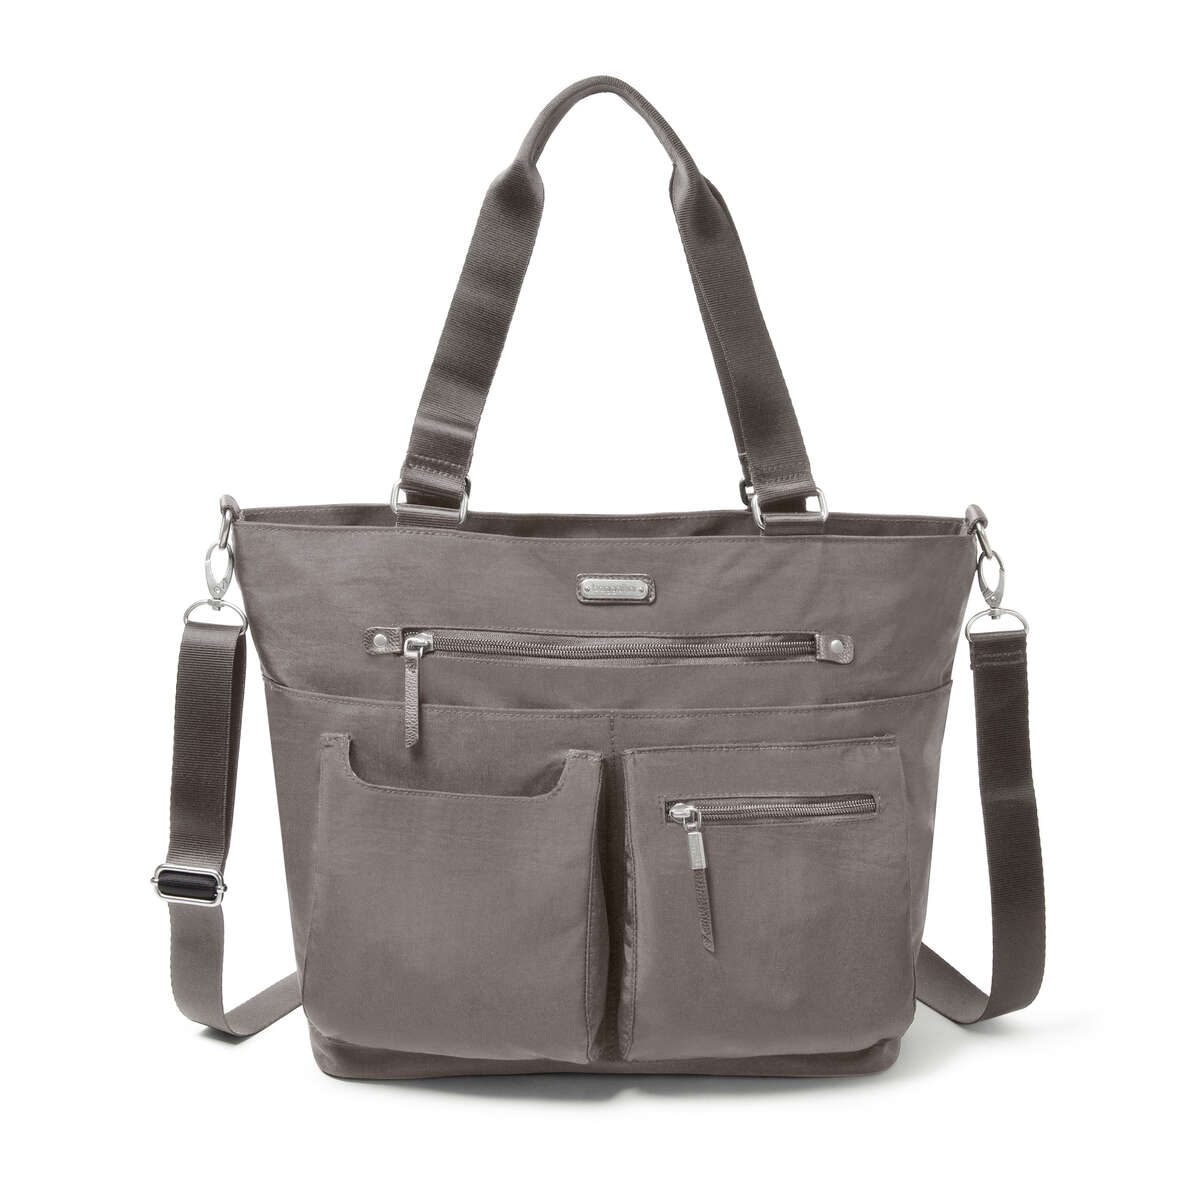 Baggallini Anyday Tote Sterling Shimmer - Grady’s Feet Essentials - Baggallini